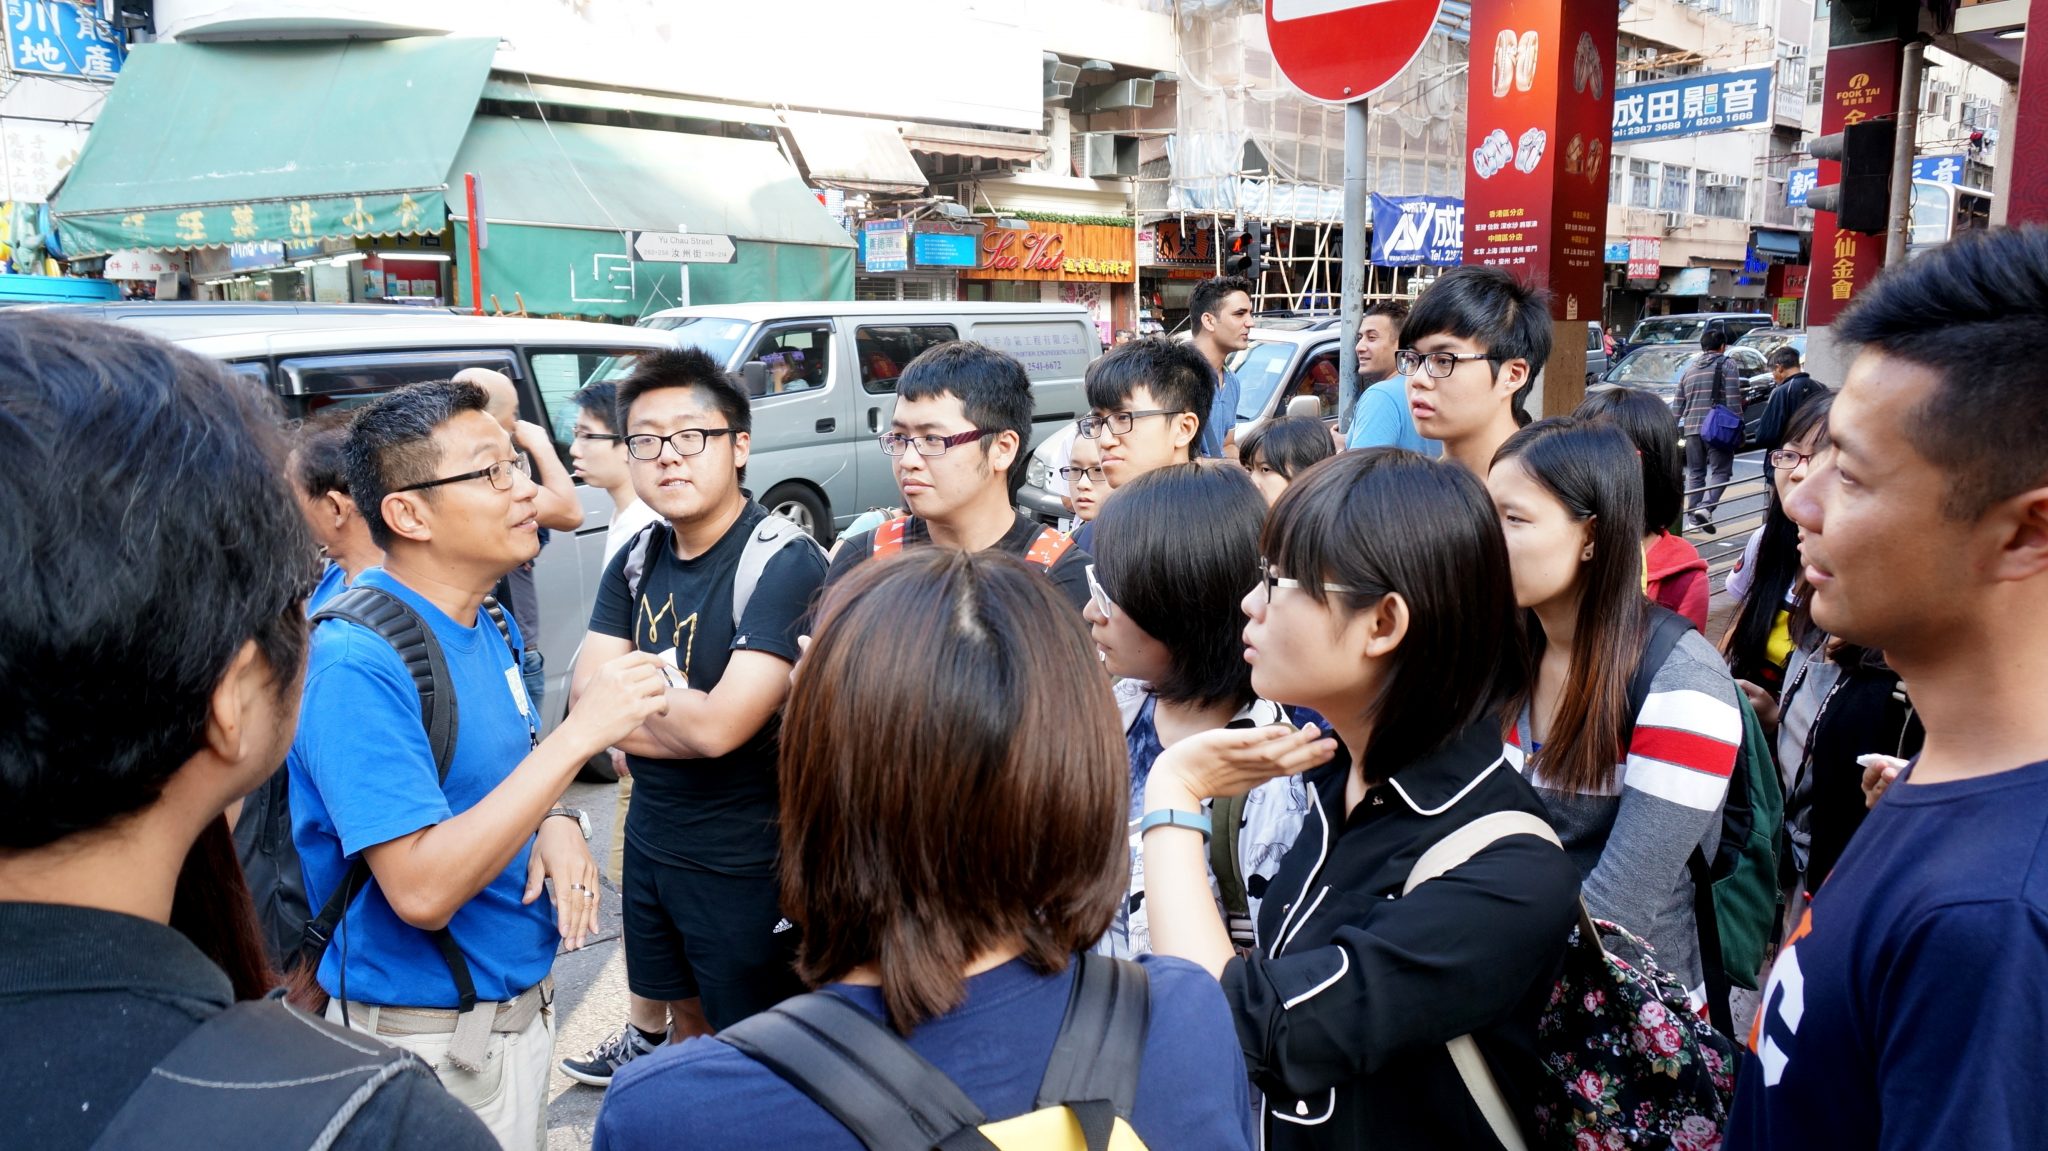 A tour in the Sham Shui Po to observe the urban development and housing issues. 大隊深入深水埗社區實地觀察城市發展及居住問題。